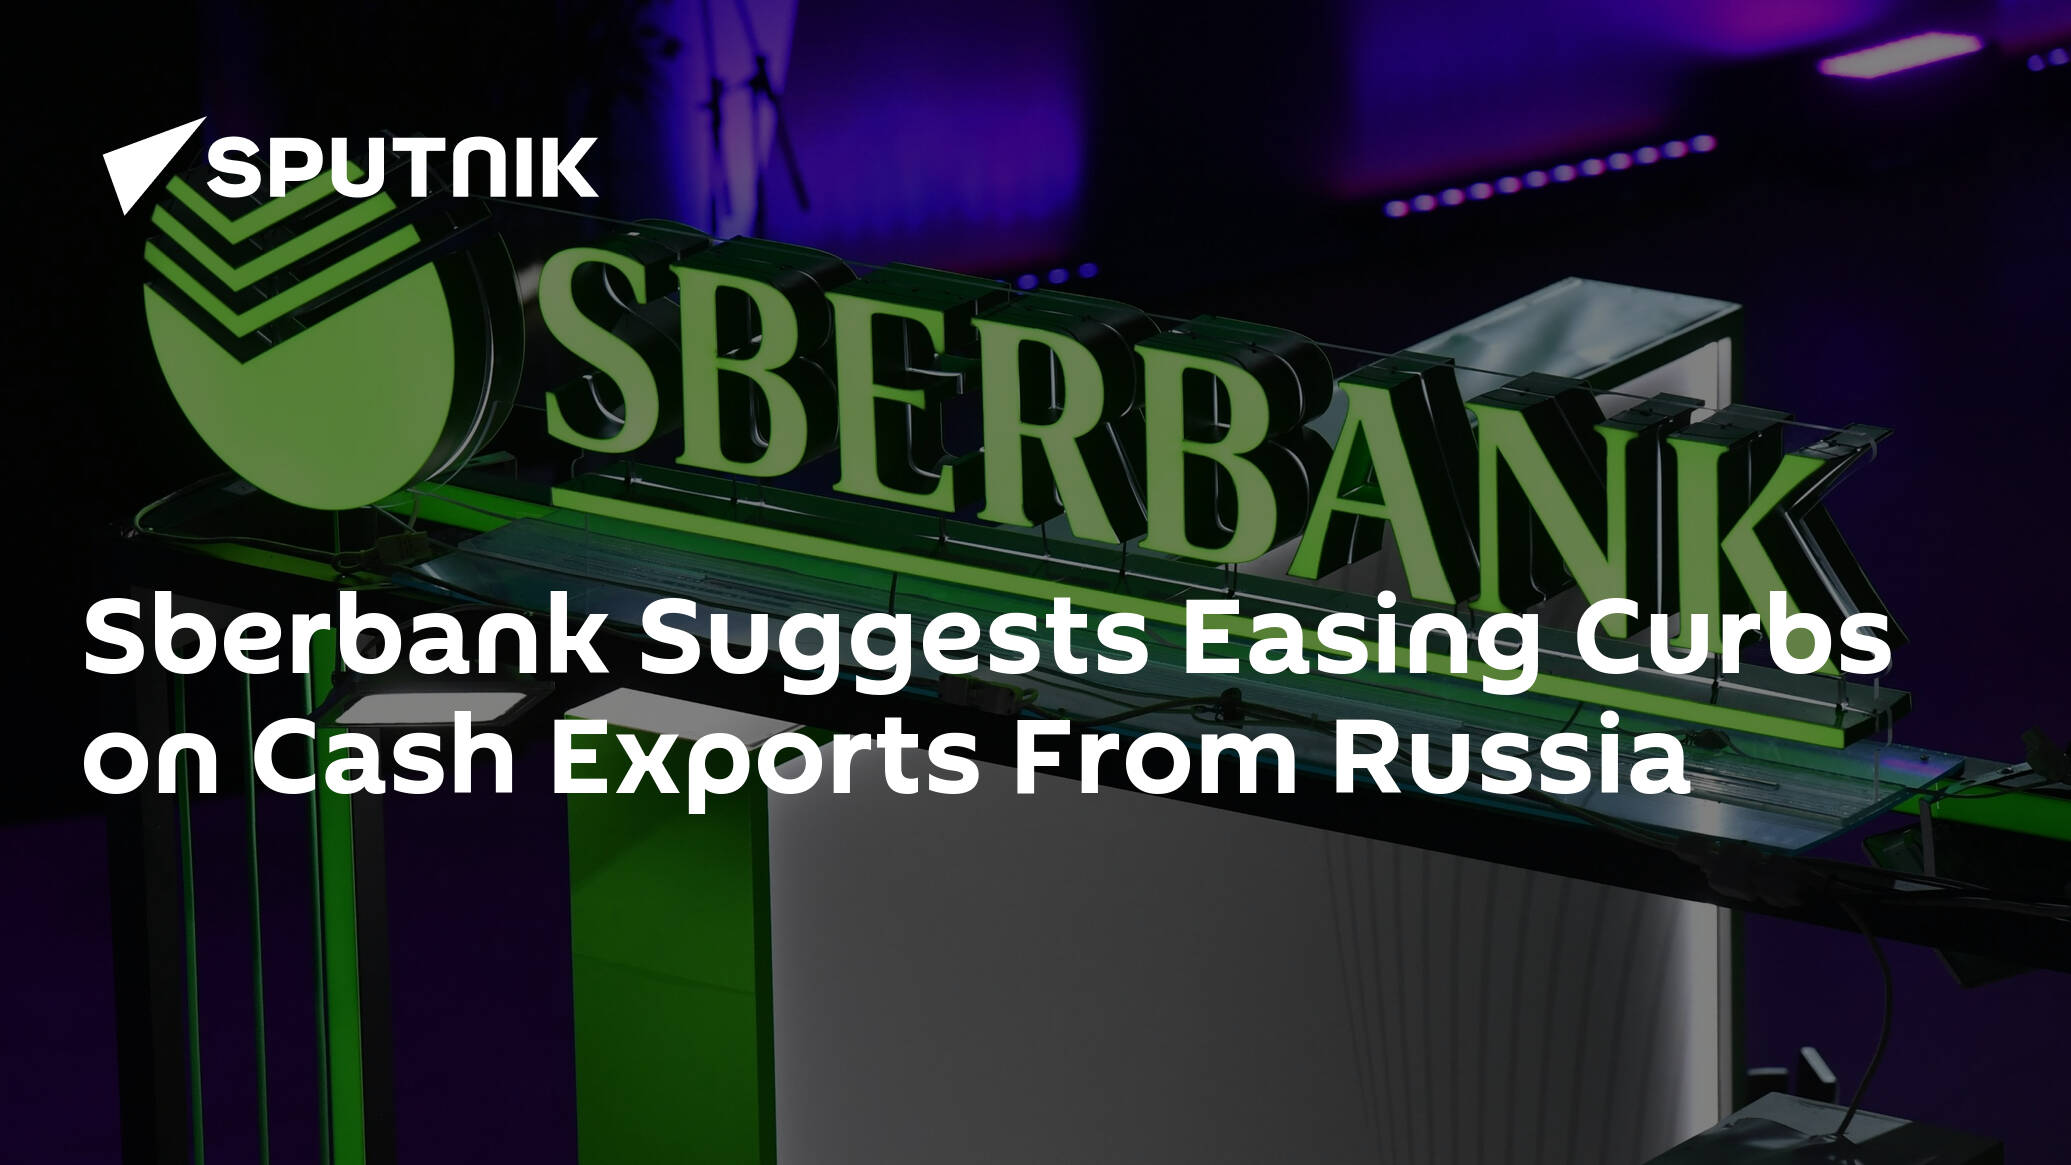 Sberbank Suggests Easing Curbs on Cash Exports From Russia